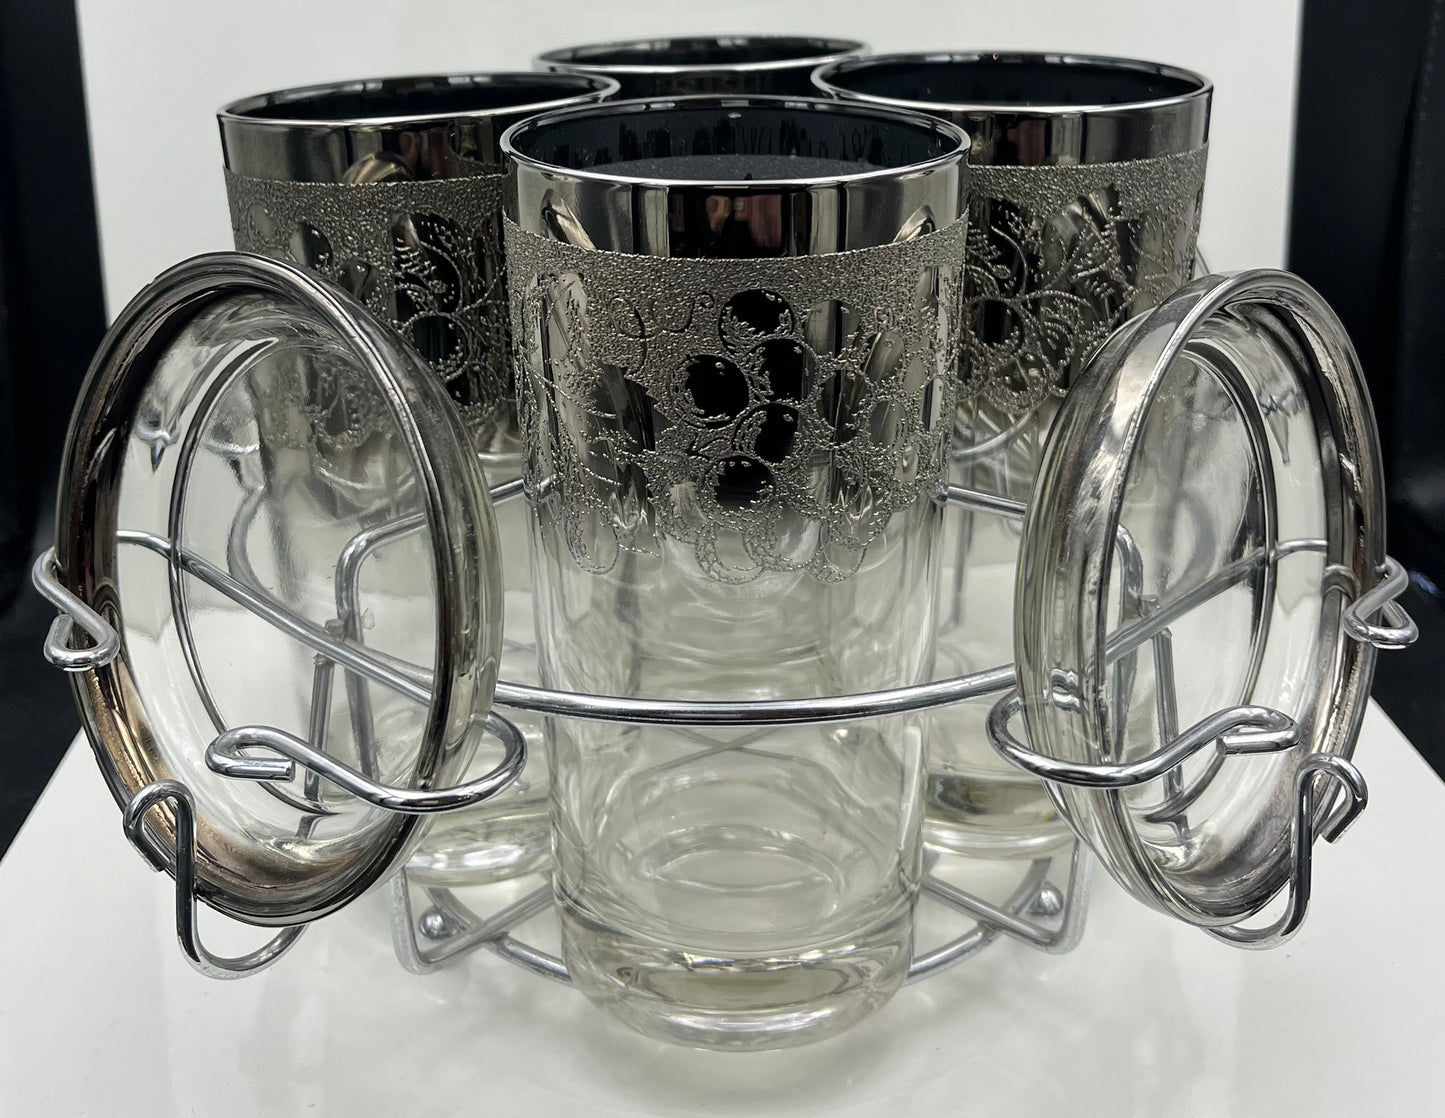 Vitreon Queens Luster set of 4 highball , 4 glass coasters, and metal caddy.